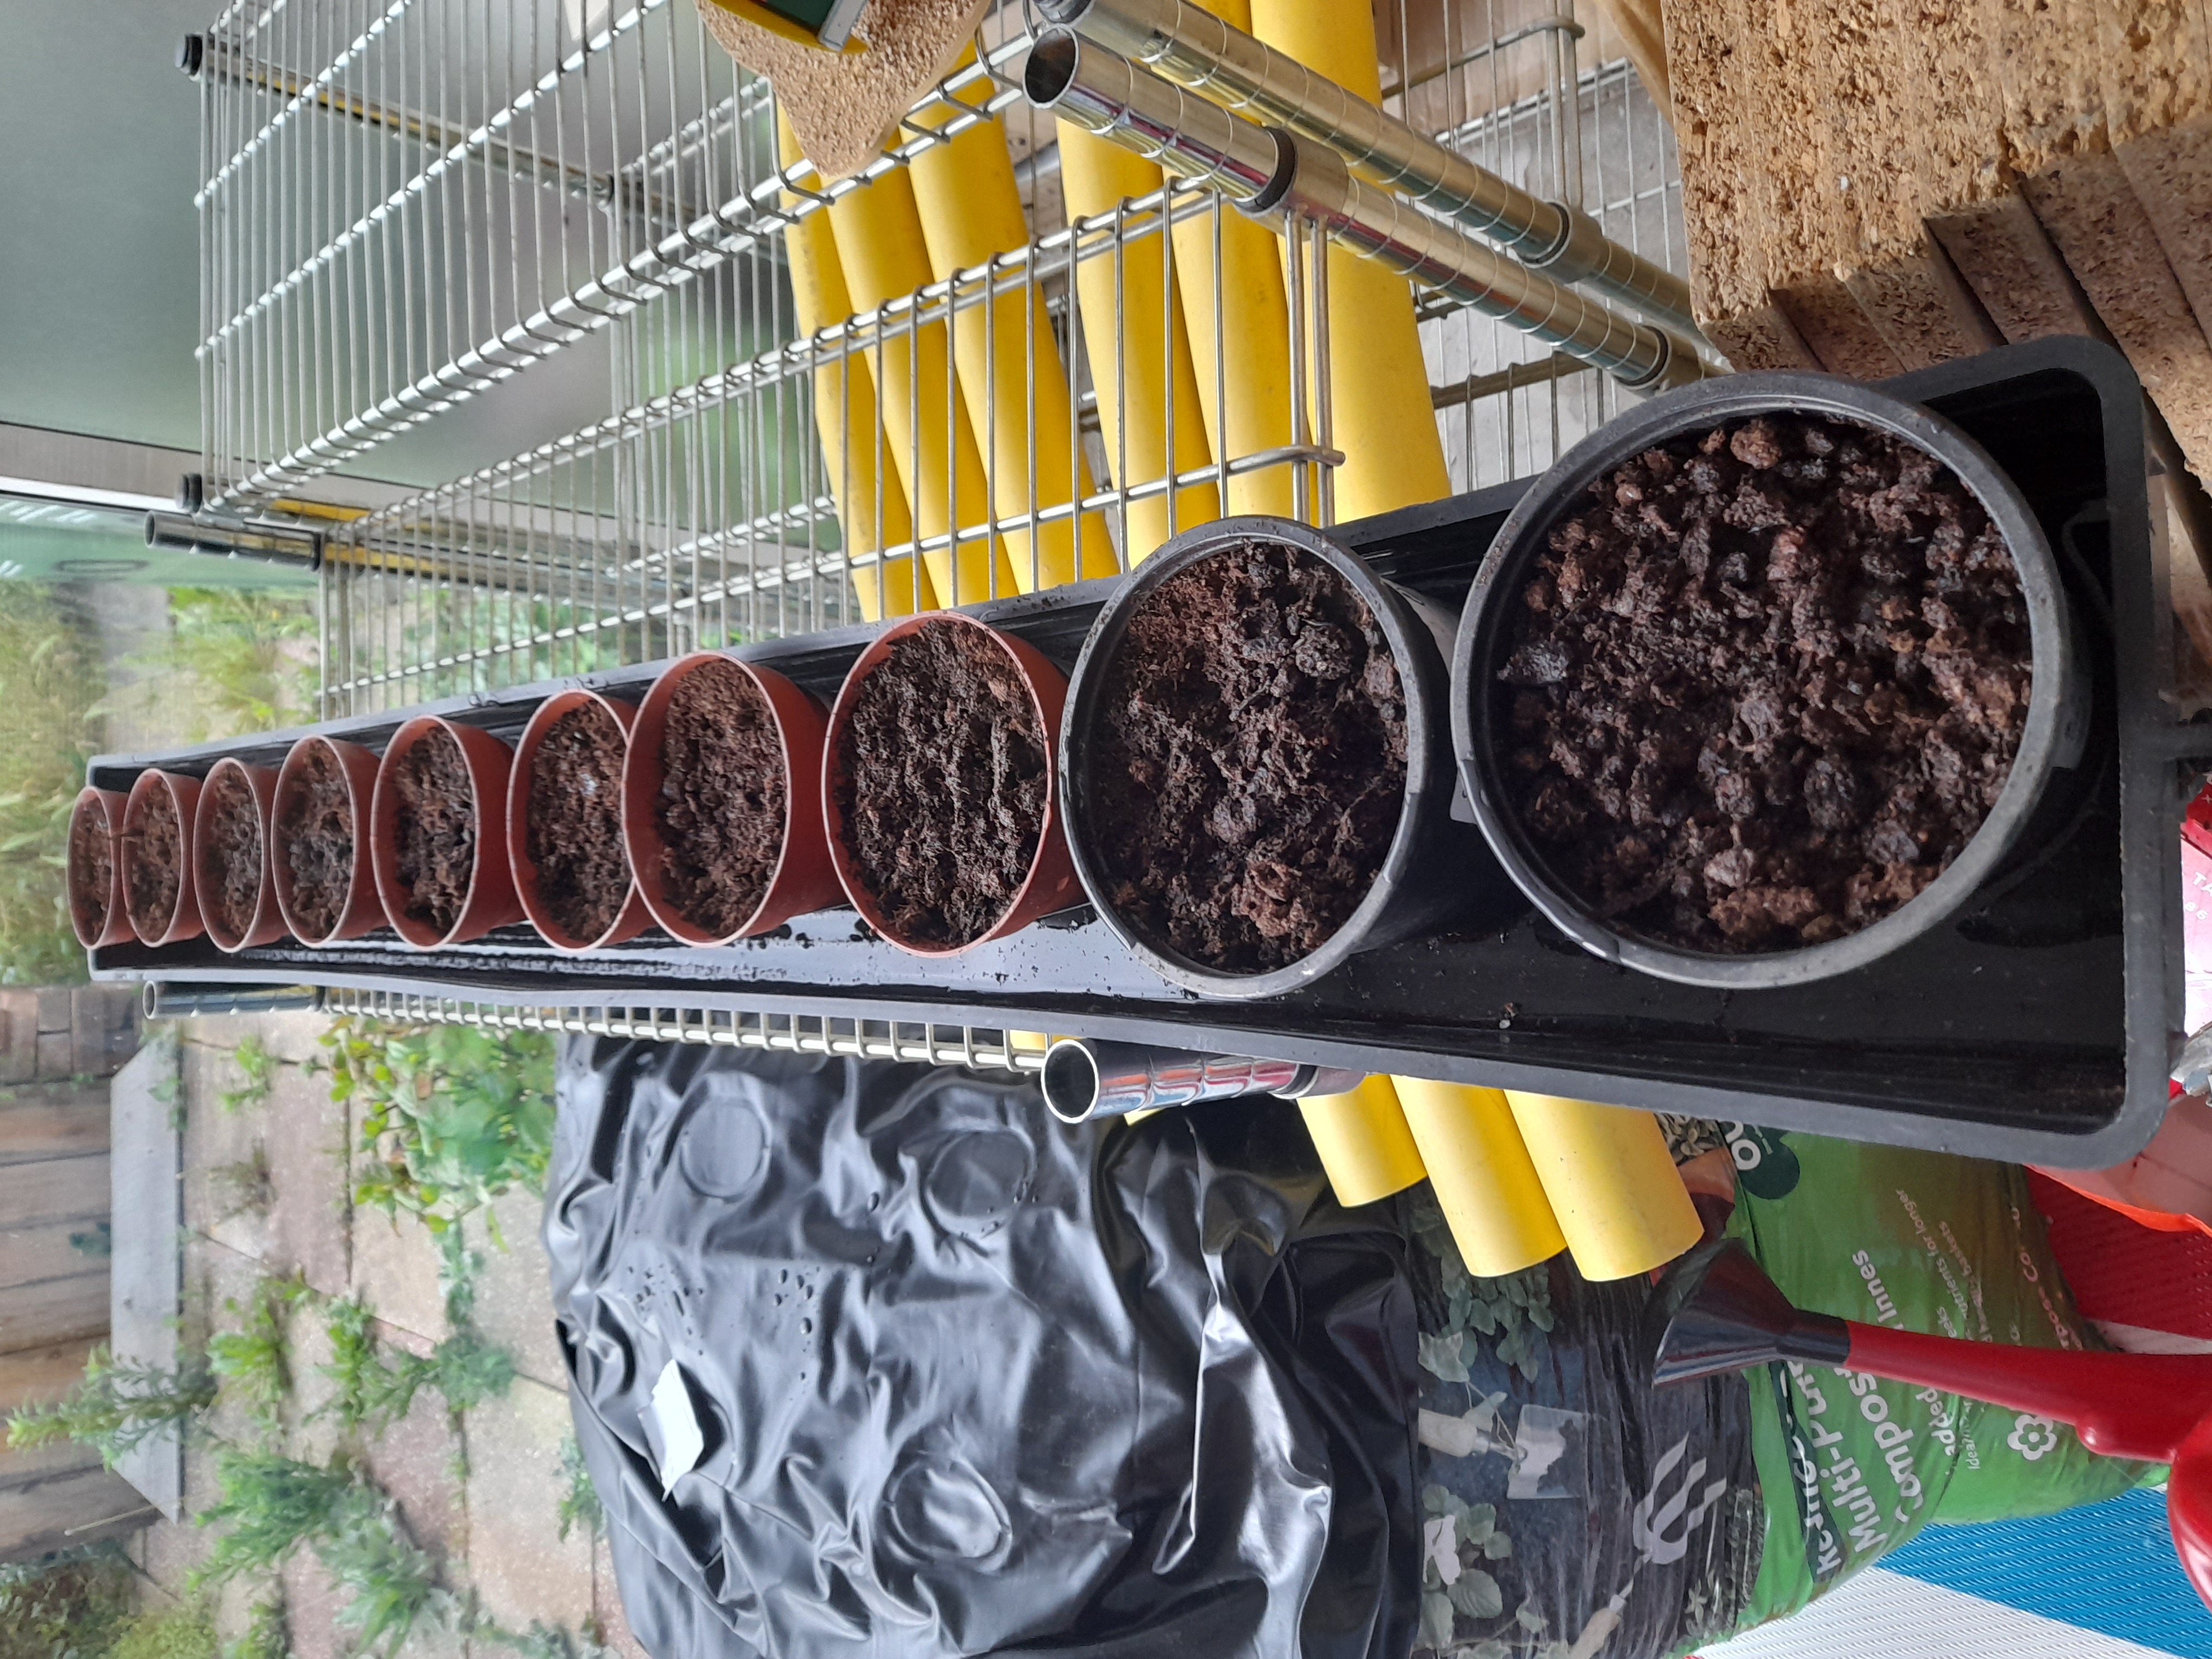 Week one, all planted up for the sunflower  challenge Dawn G.